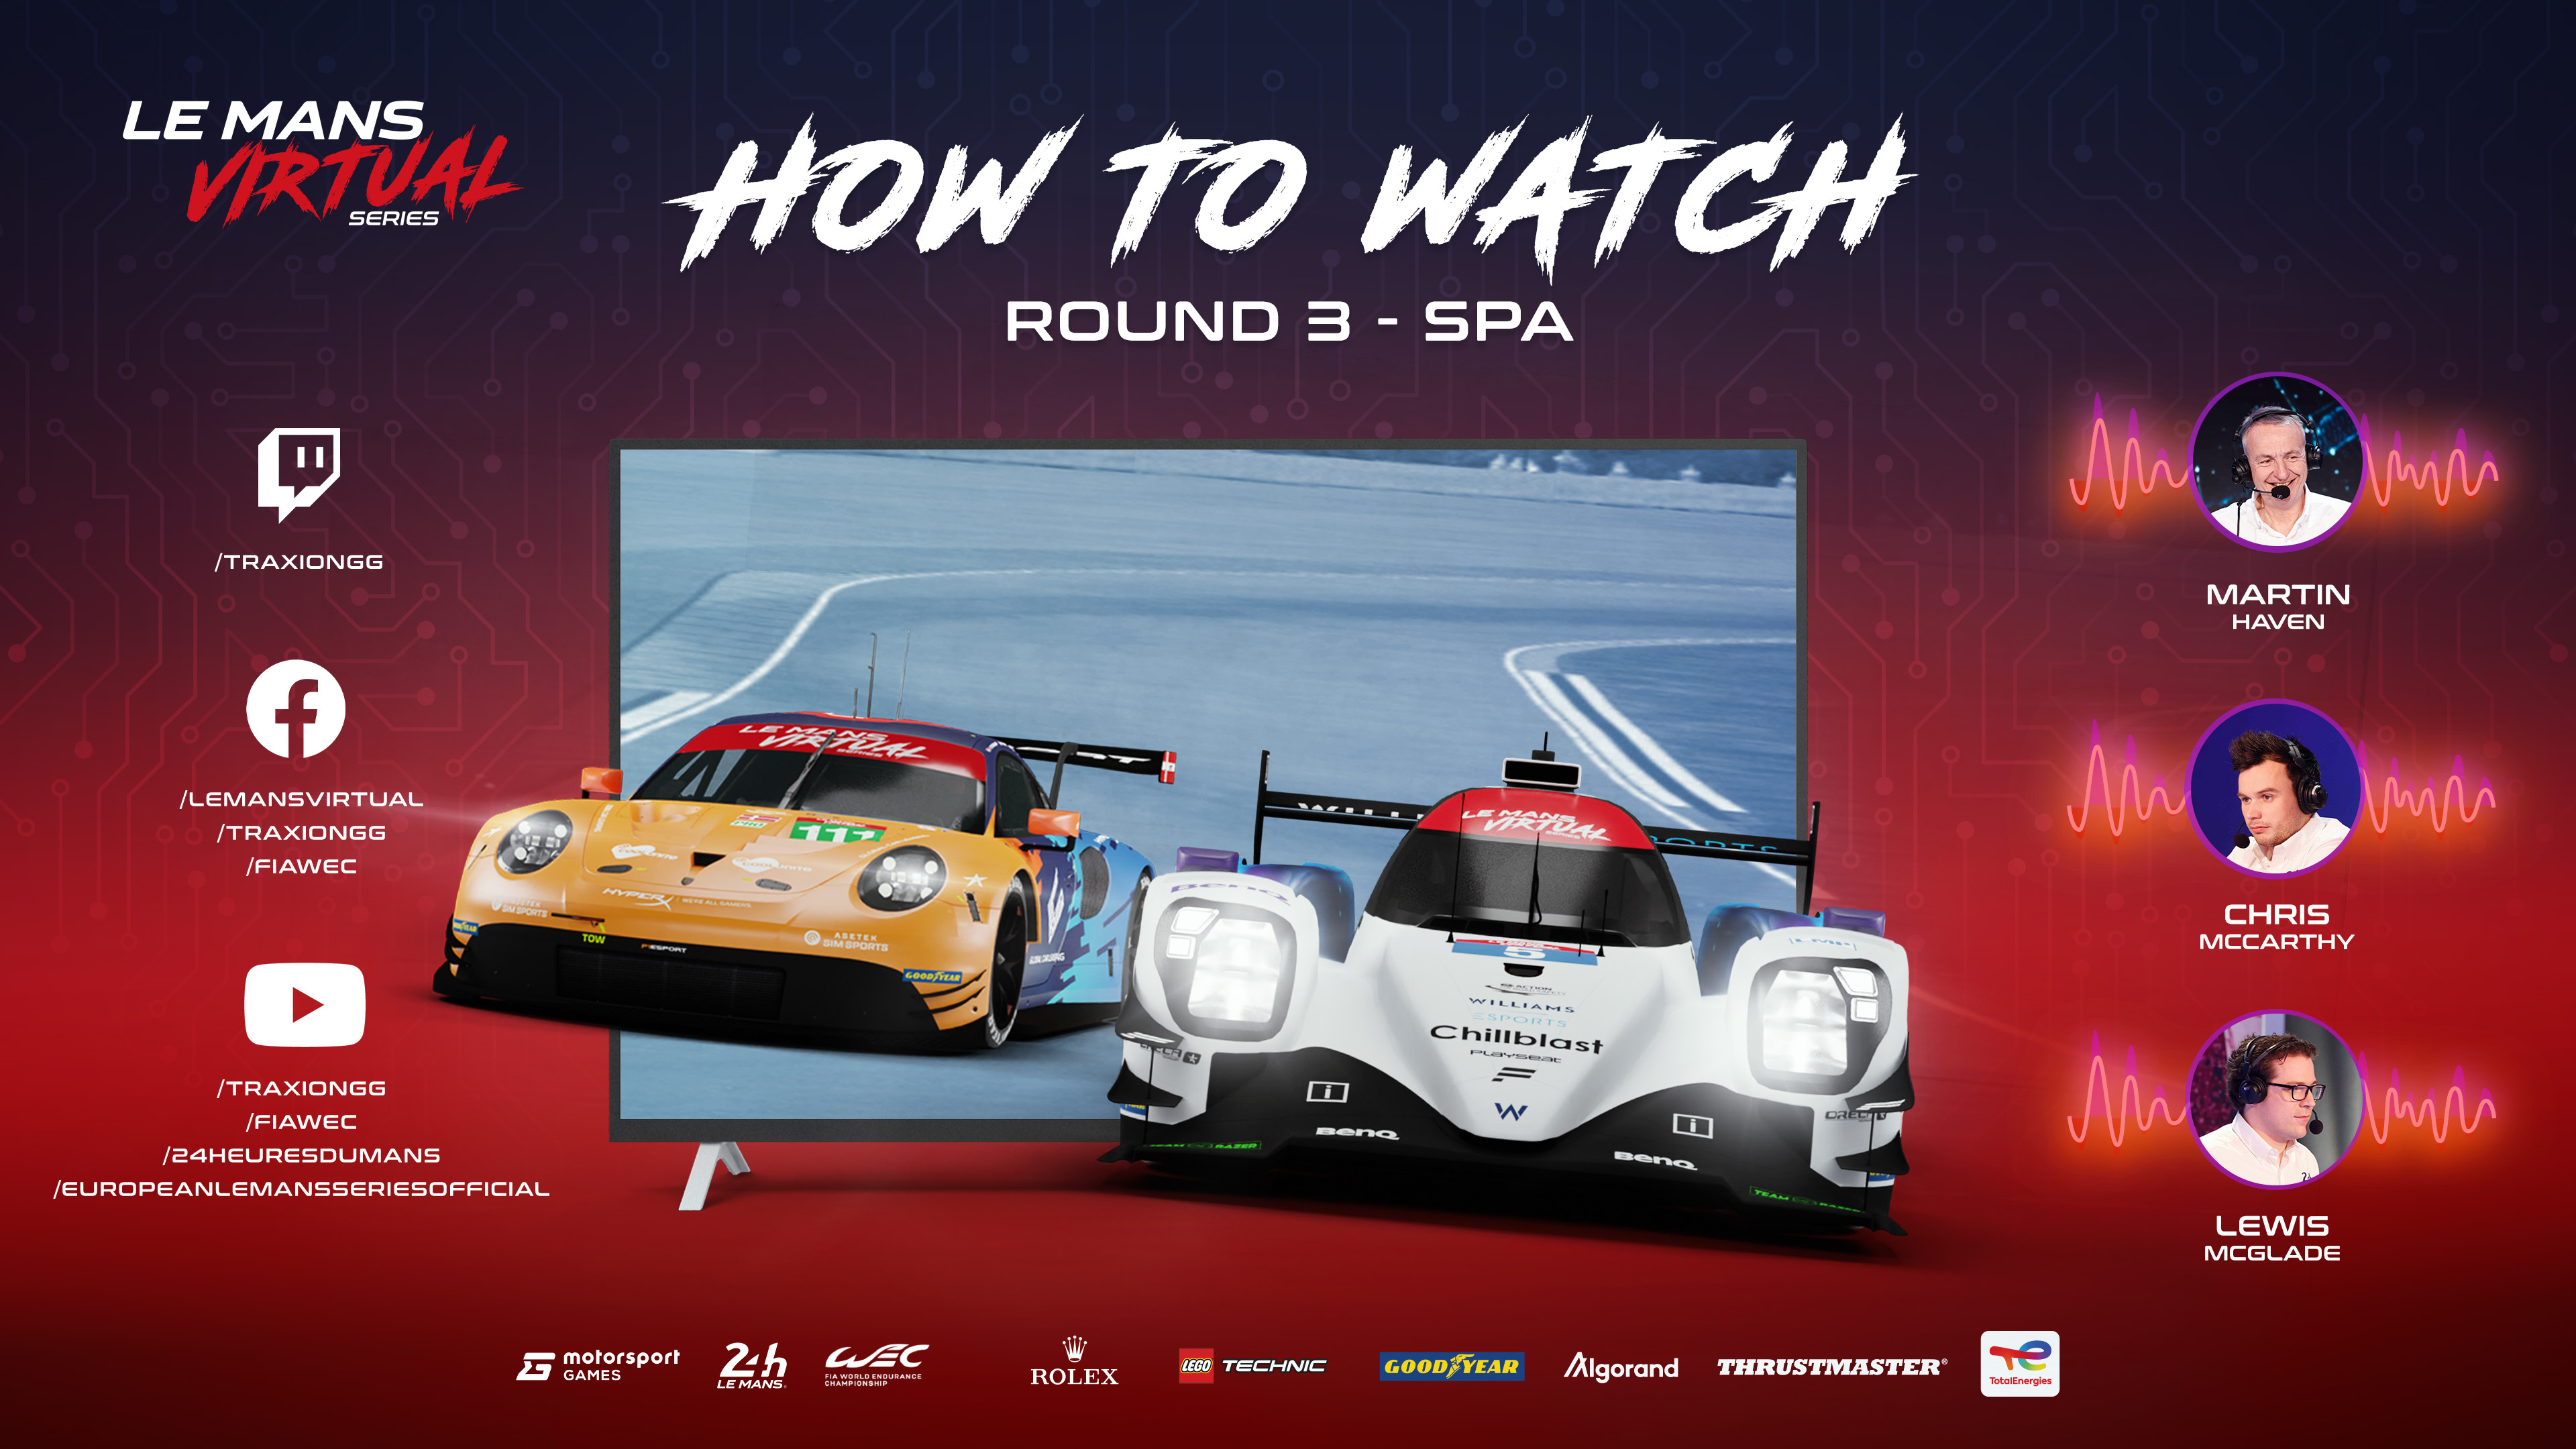 STARS COME OUT FOR THE 6 HOURS OF SPA ROUND OF THE LE MANS VIRTUAL SERIES BY MOTORSPORT GAMES